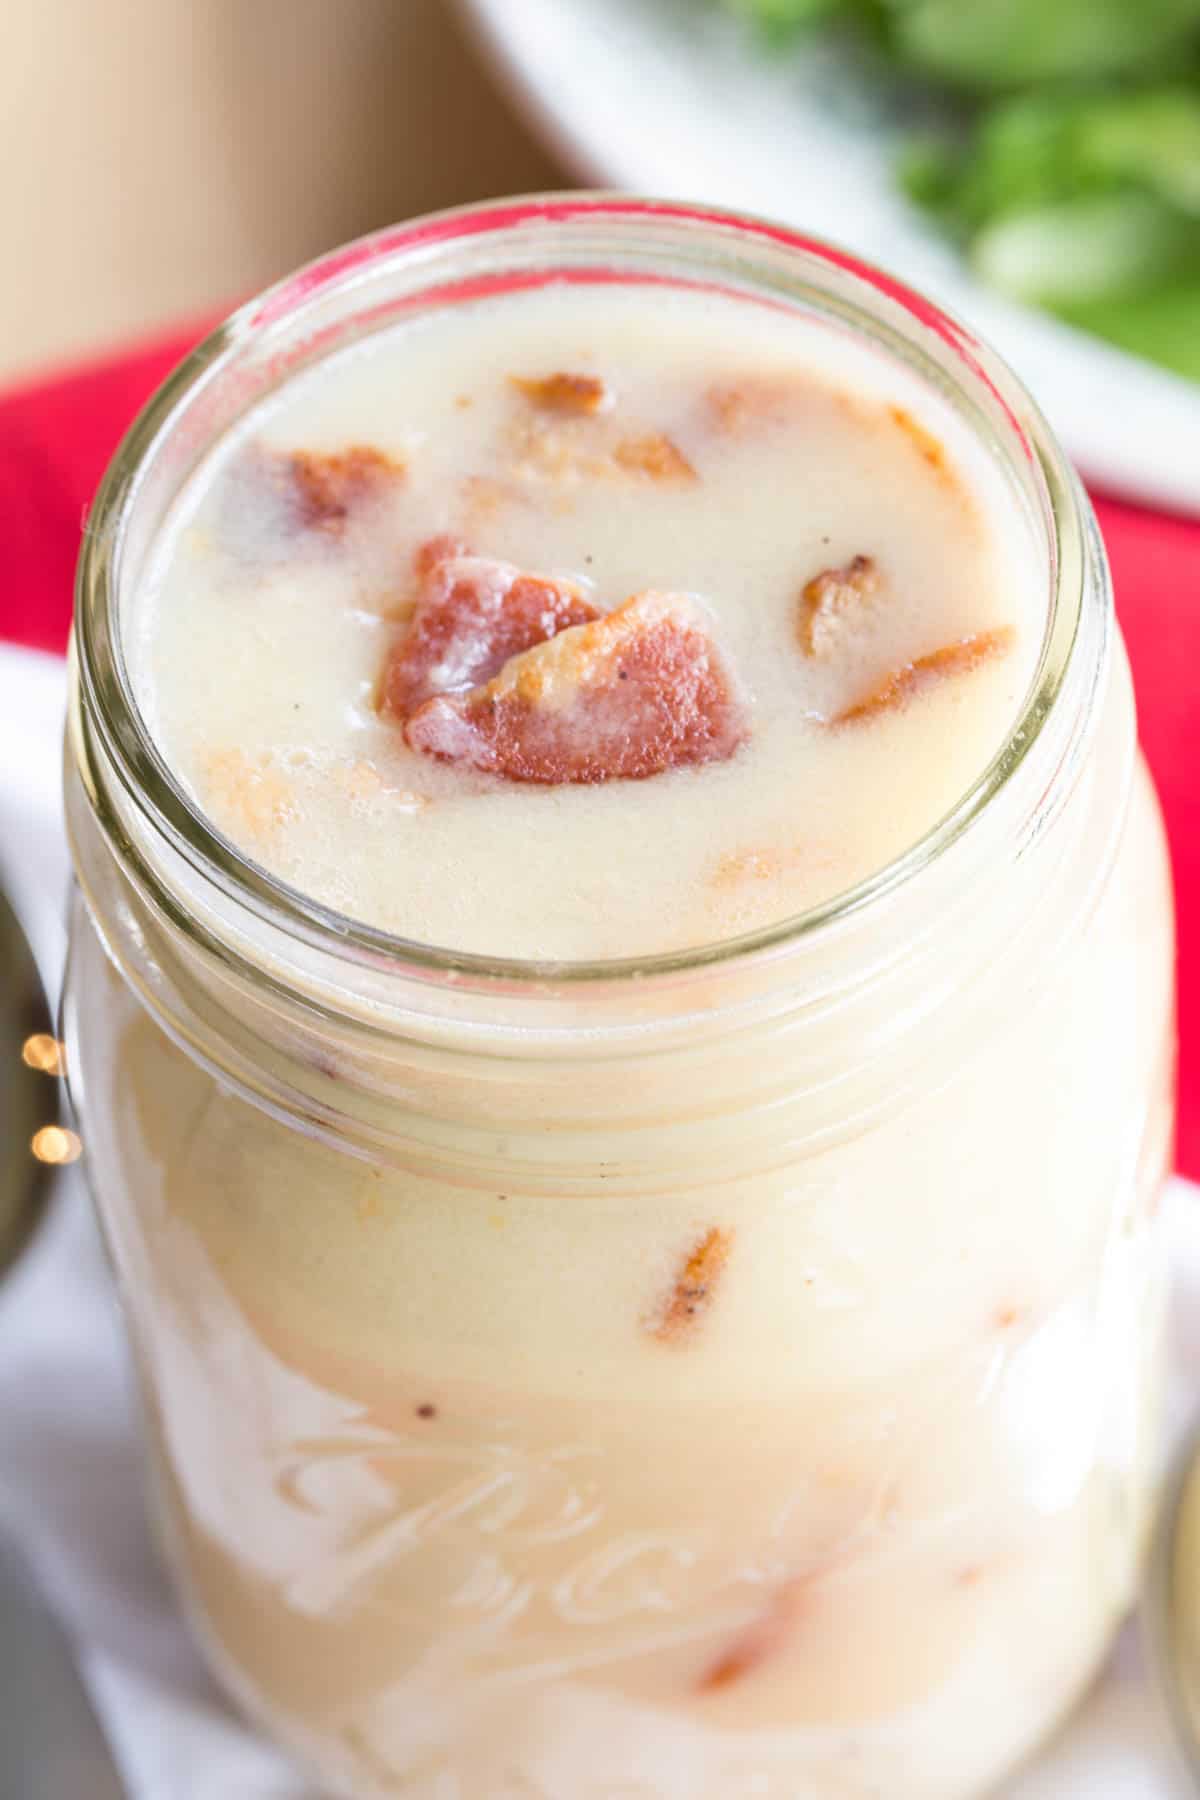 Looking down at the top of a jar of hot bacon dressing with pieces of bacon on top.